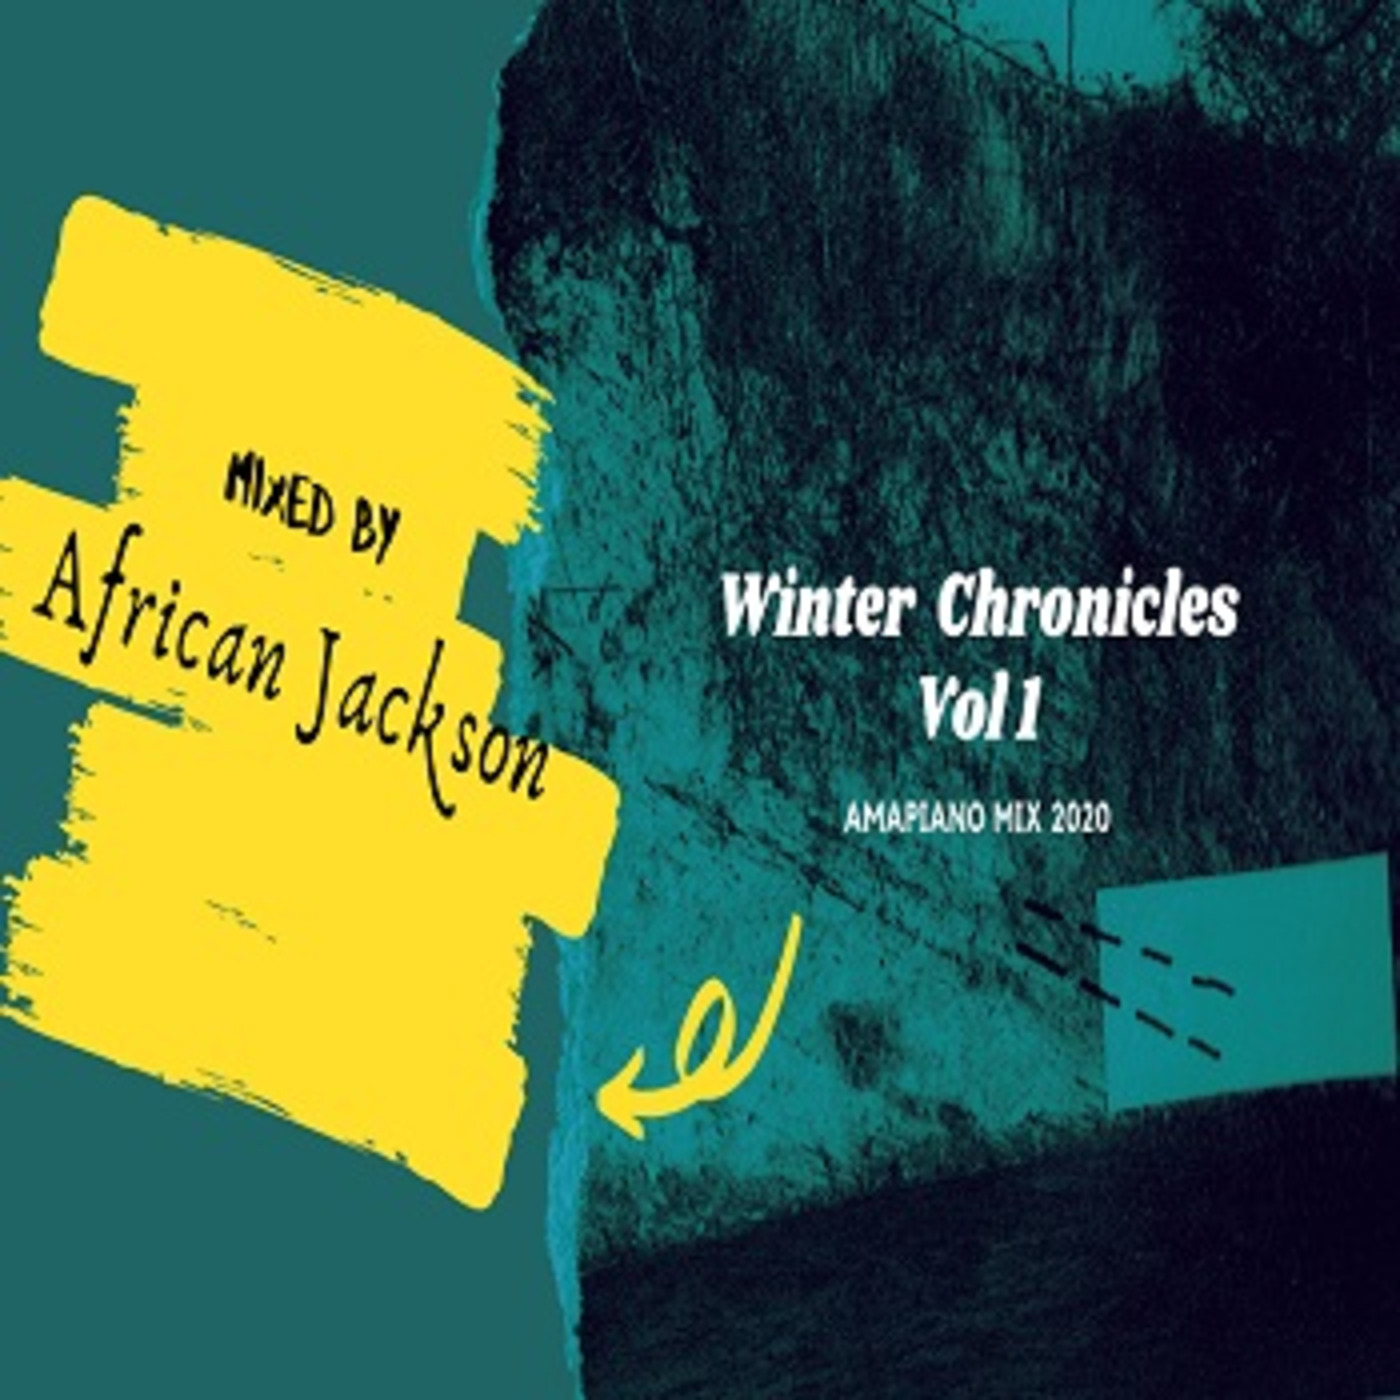 Winter Chronicles Vol 1 Piano Mix By African Jackson